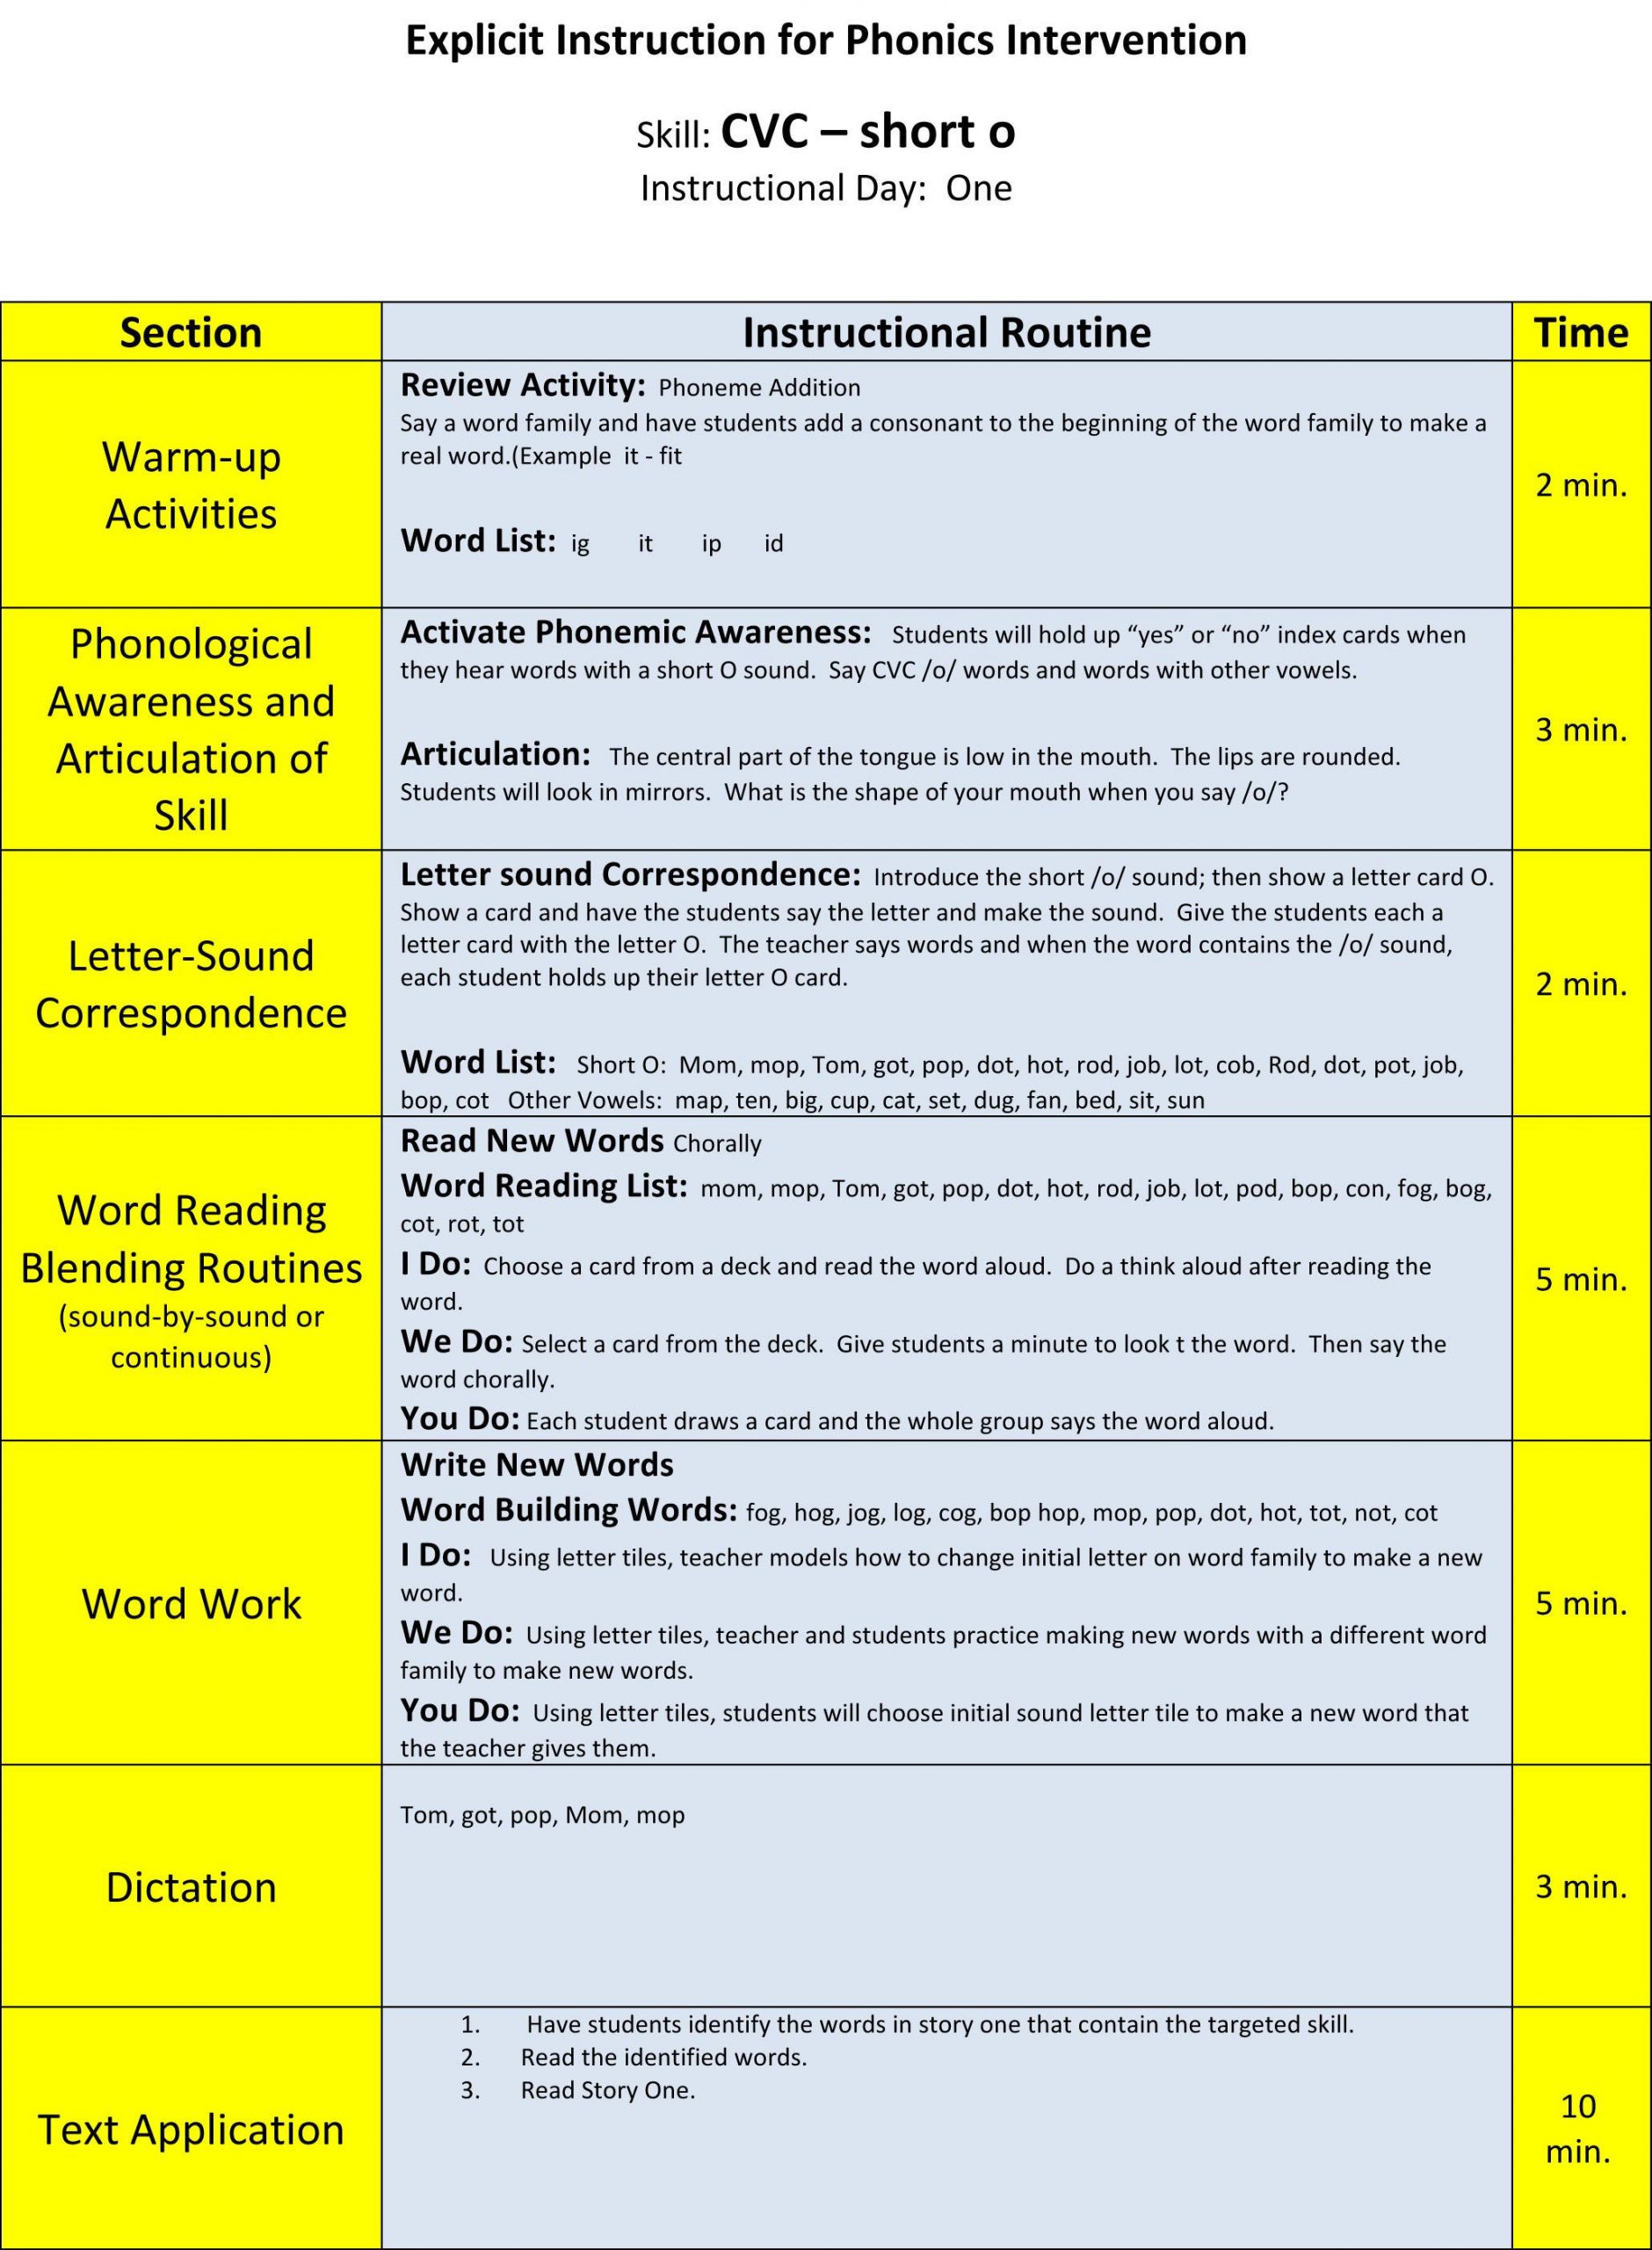 Phonics Lesson Plans Phonic Lesson Plans From West Virginia Housed In the